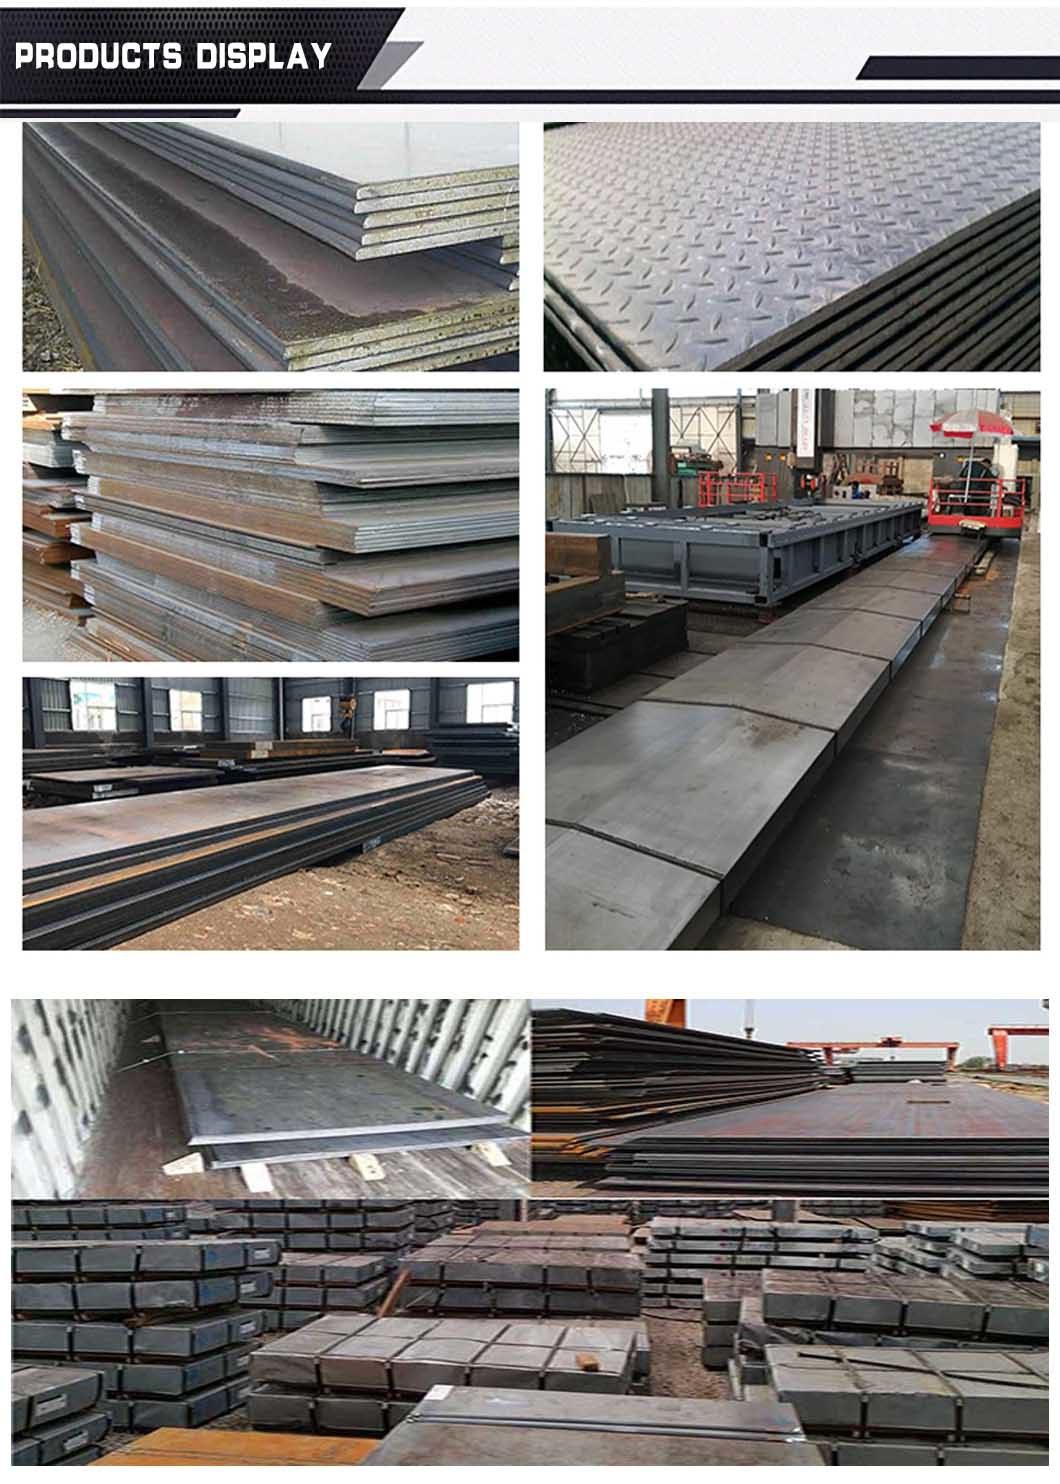 En10025 S235jr (1.0038 Steel) Data Sheet Specification Hot Rolled Non Alloy Structural Carbon Steel Plate